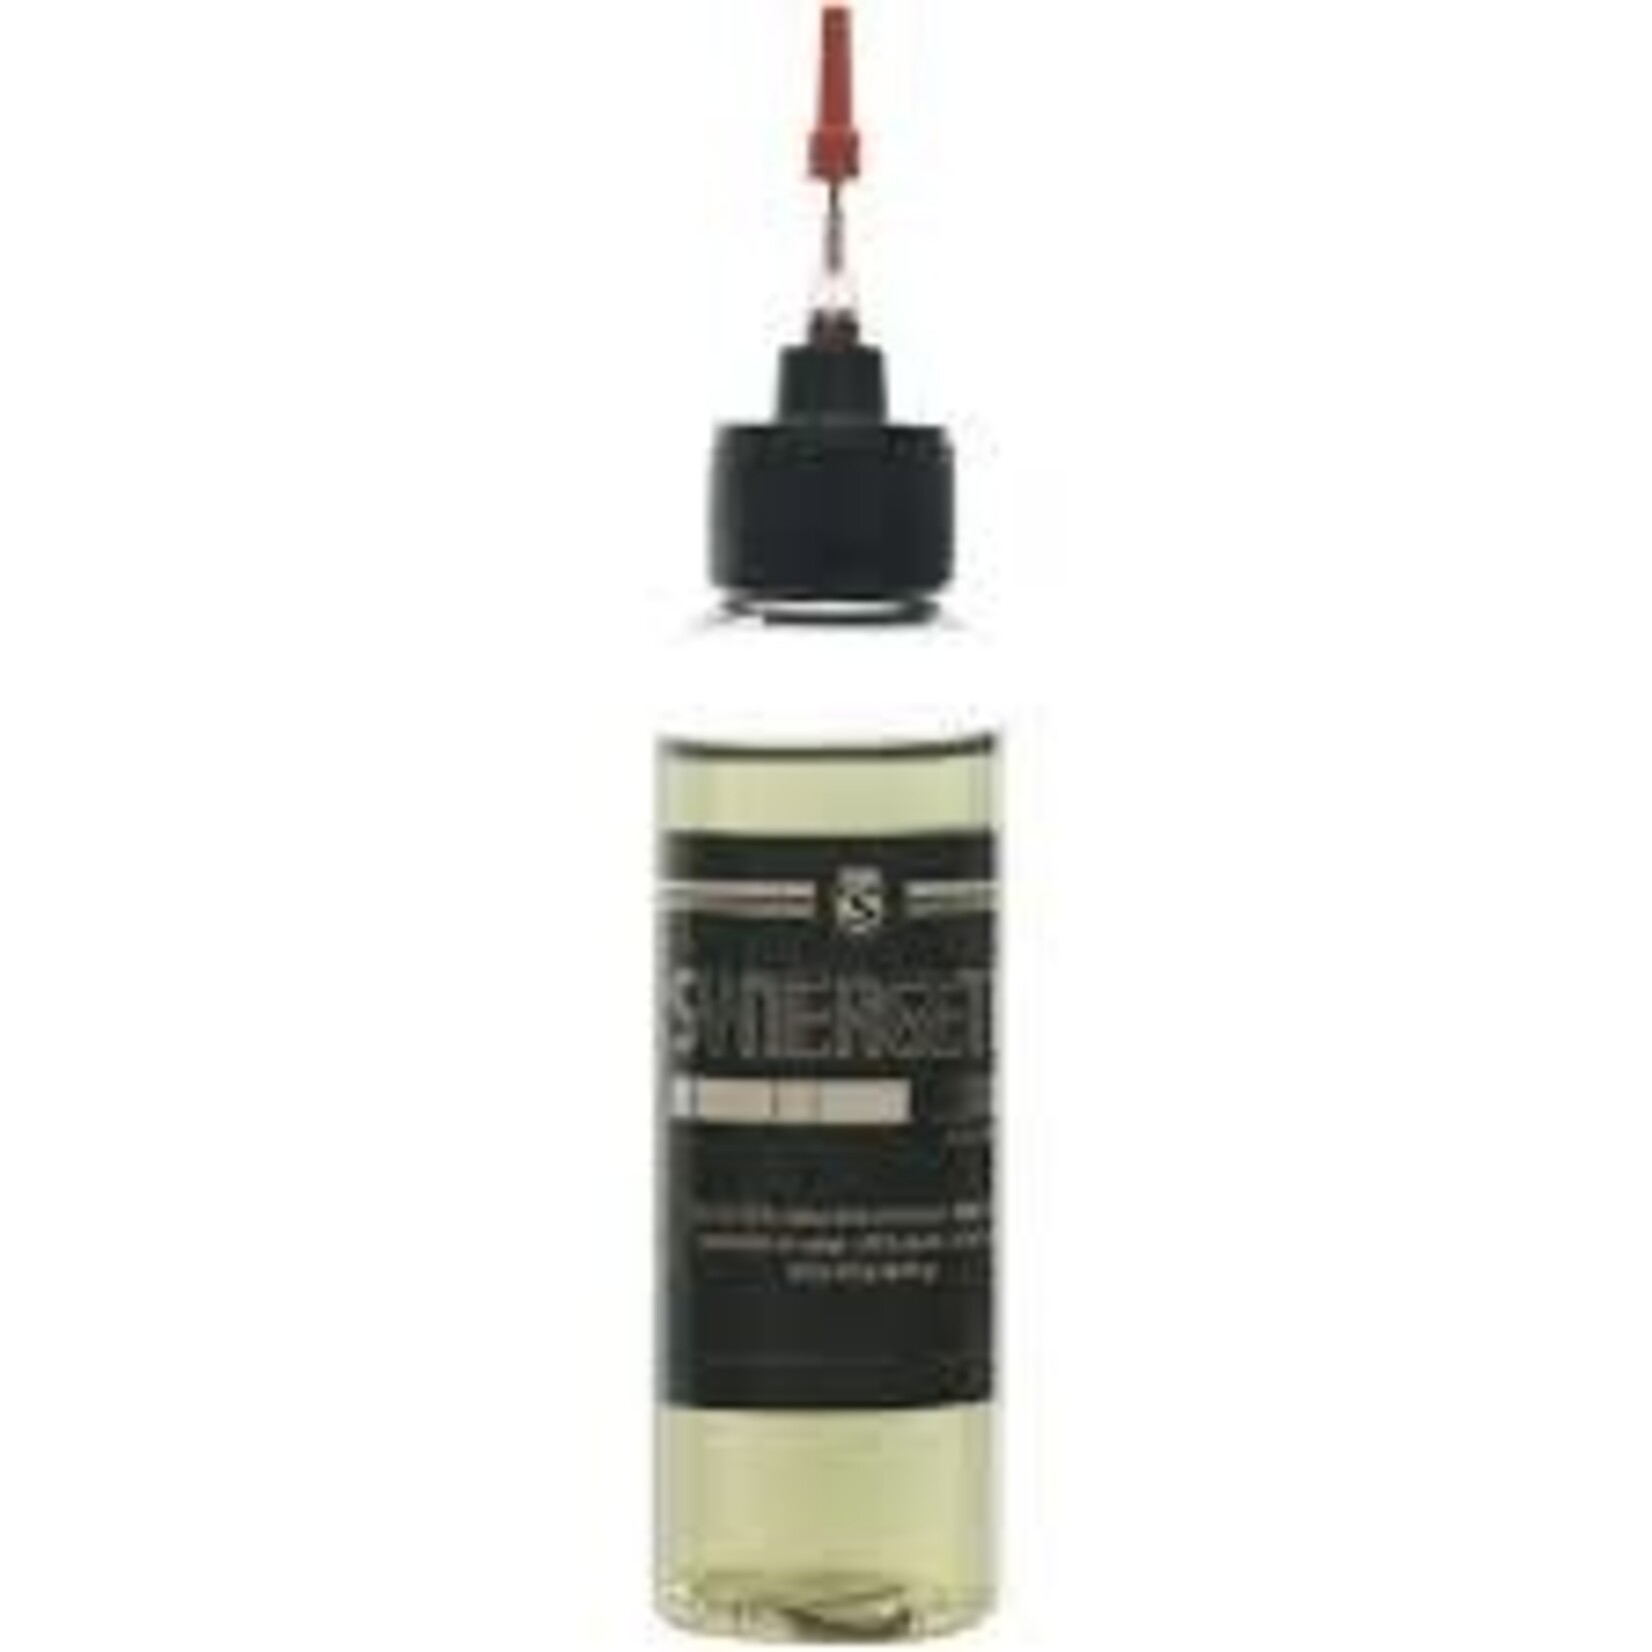 Silca Silca Synergetic Wet Lube - 2oz